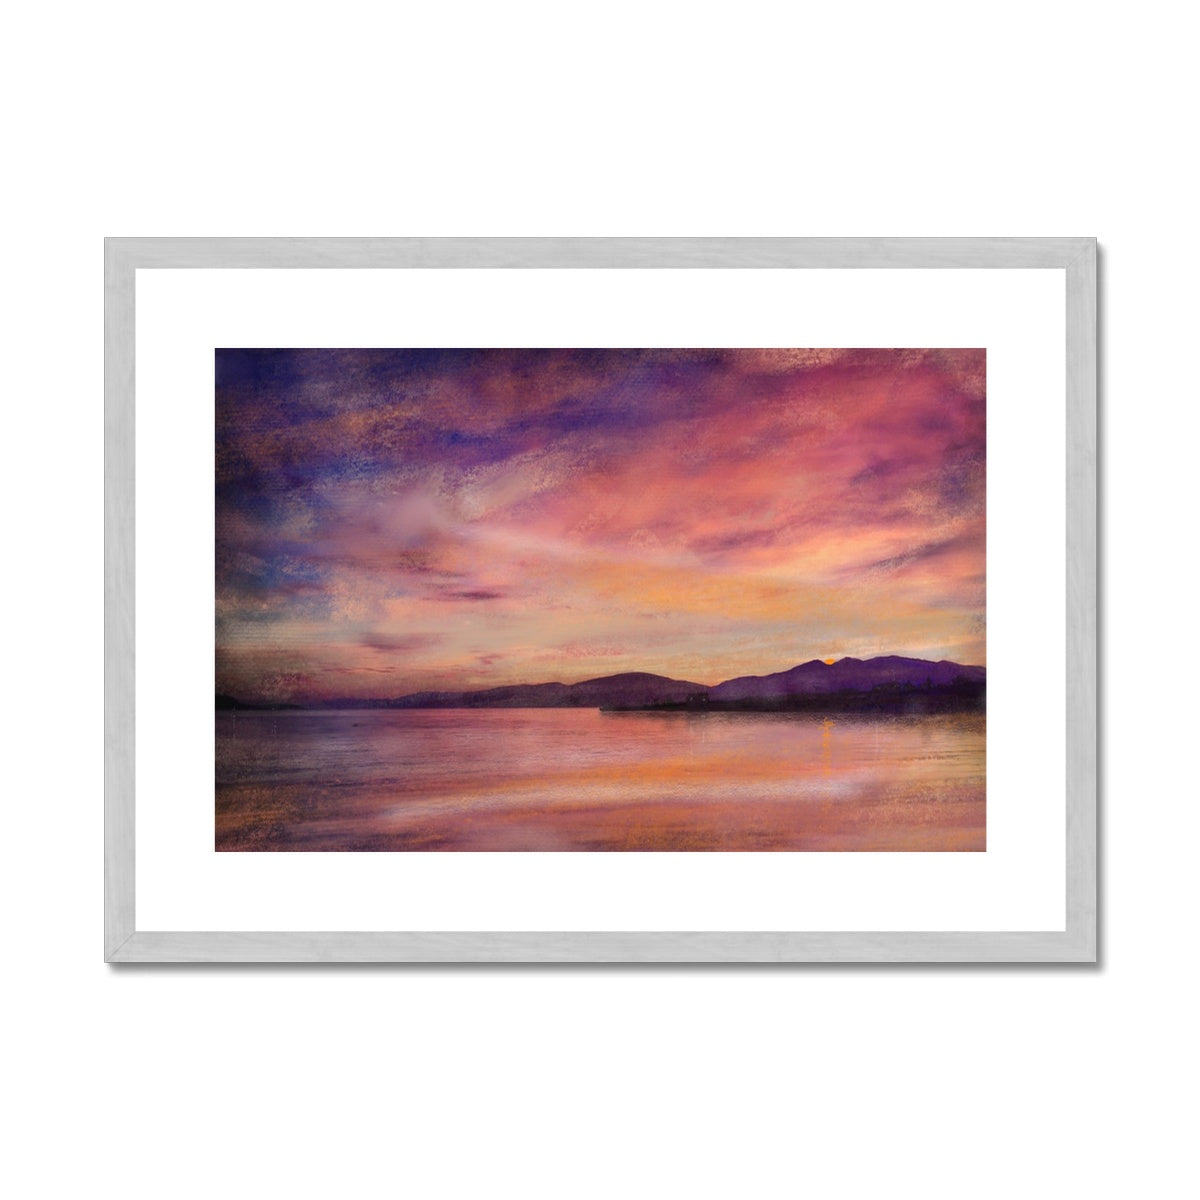 Loch Linnhe Dusk Painting | Antique Framed & Mounted Prints From Scotland-Antique Framed & Mounted Prints-Scottish Lochs & Mountains Art Gallery-A2 Landscape-Silver Frame-Paintings, Prints, Homeware, Art Gifts From Scotland By Scottish Artist Kevin Hunter